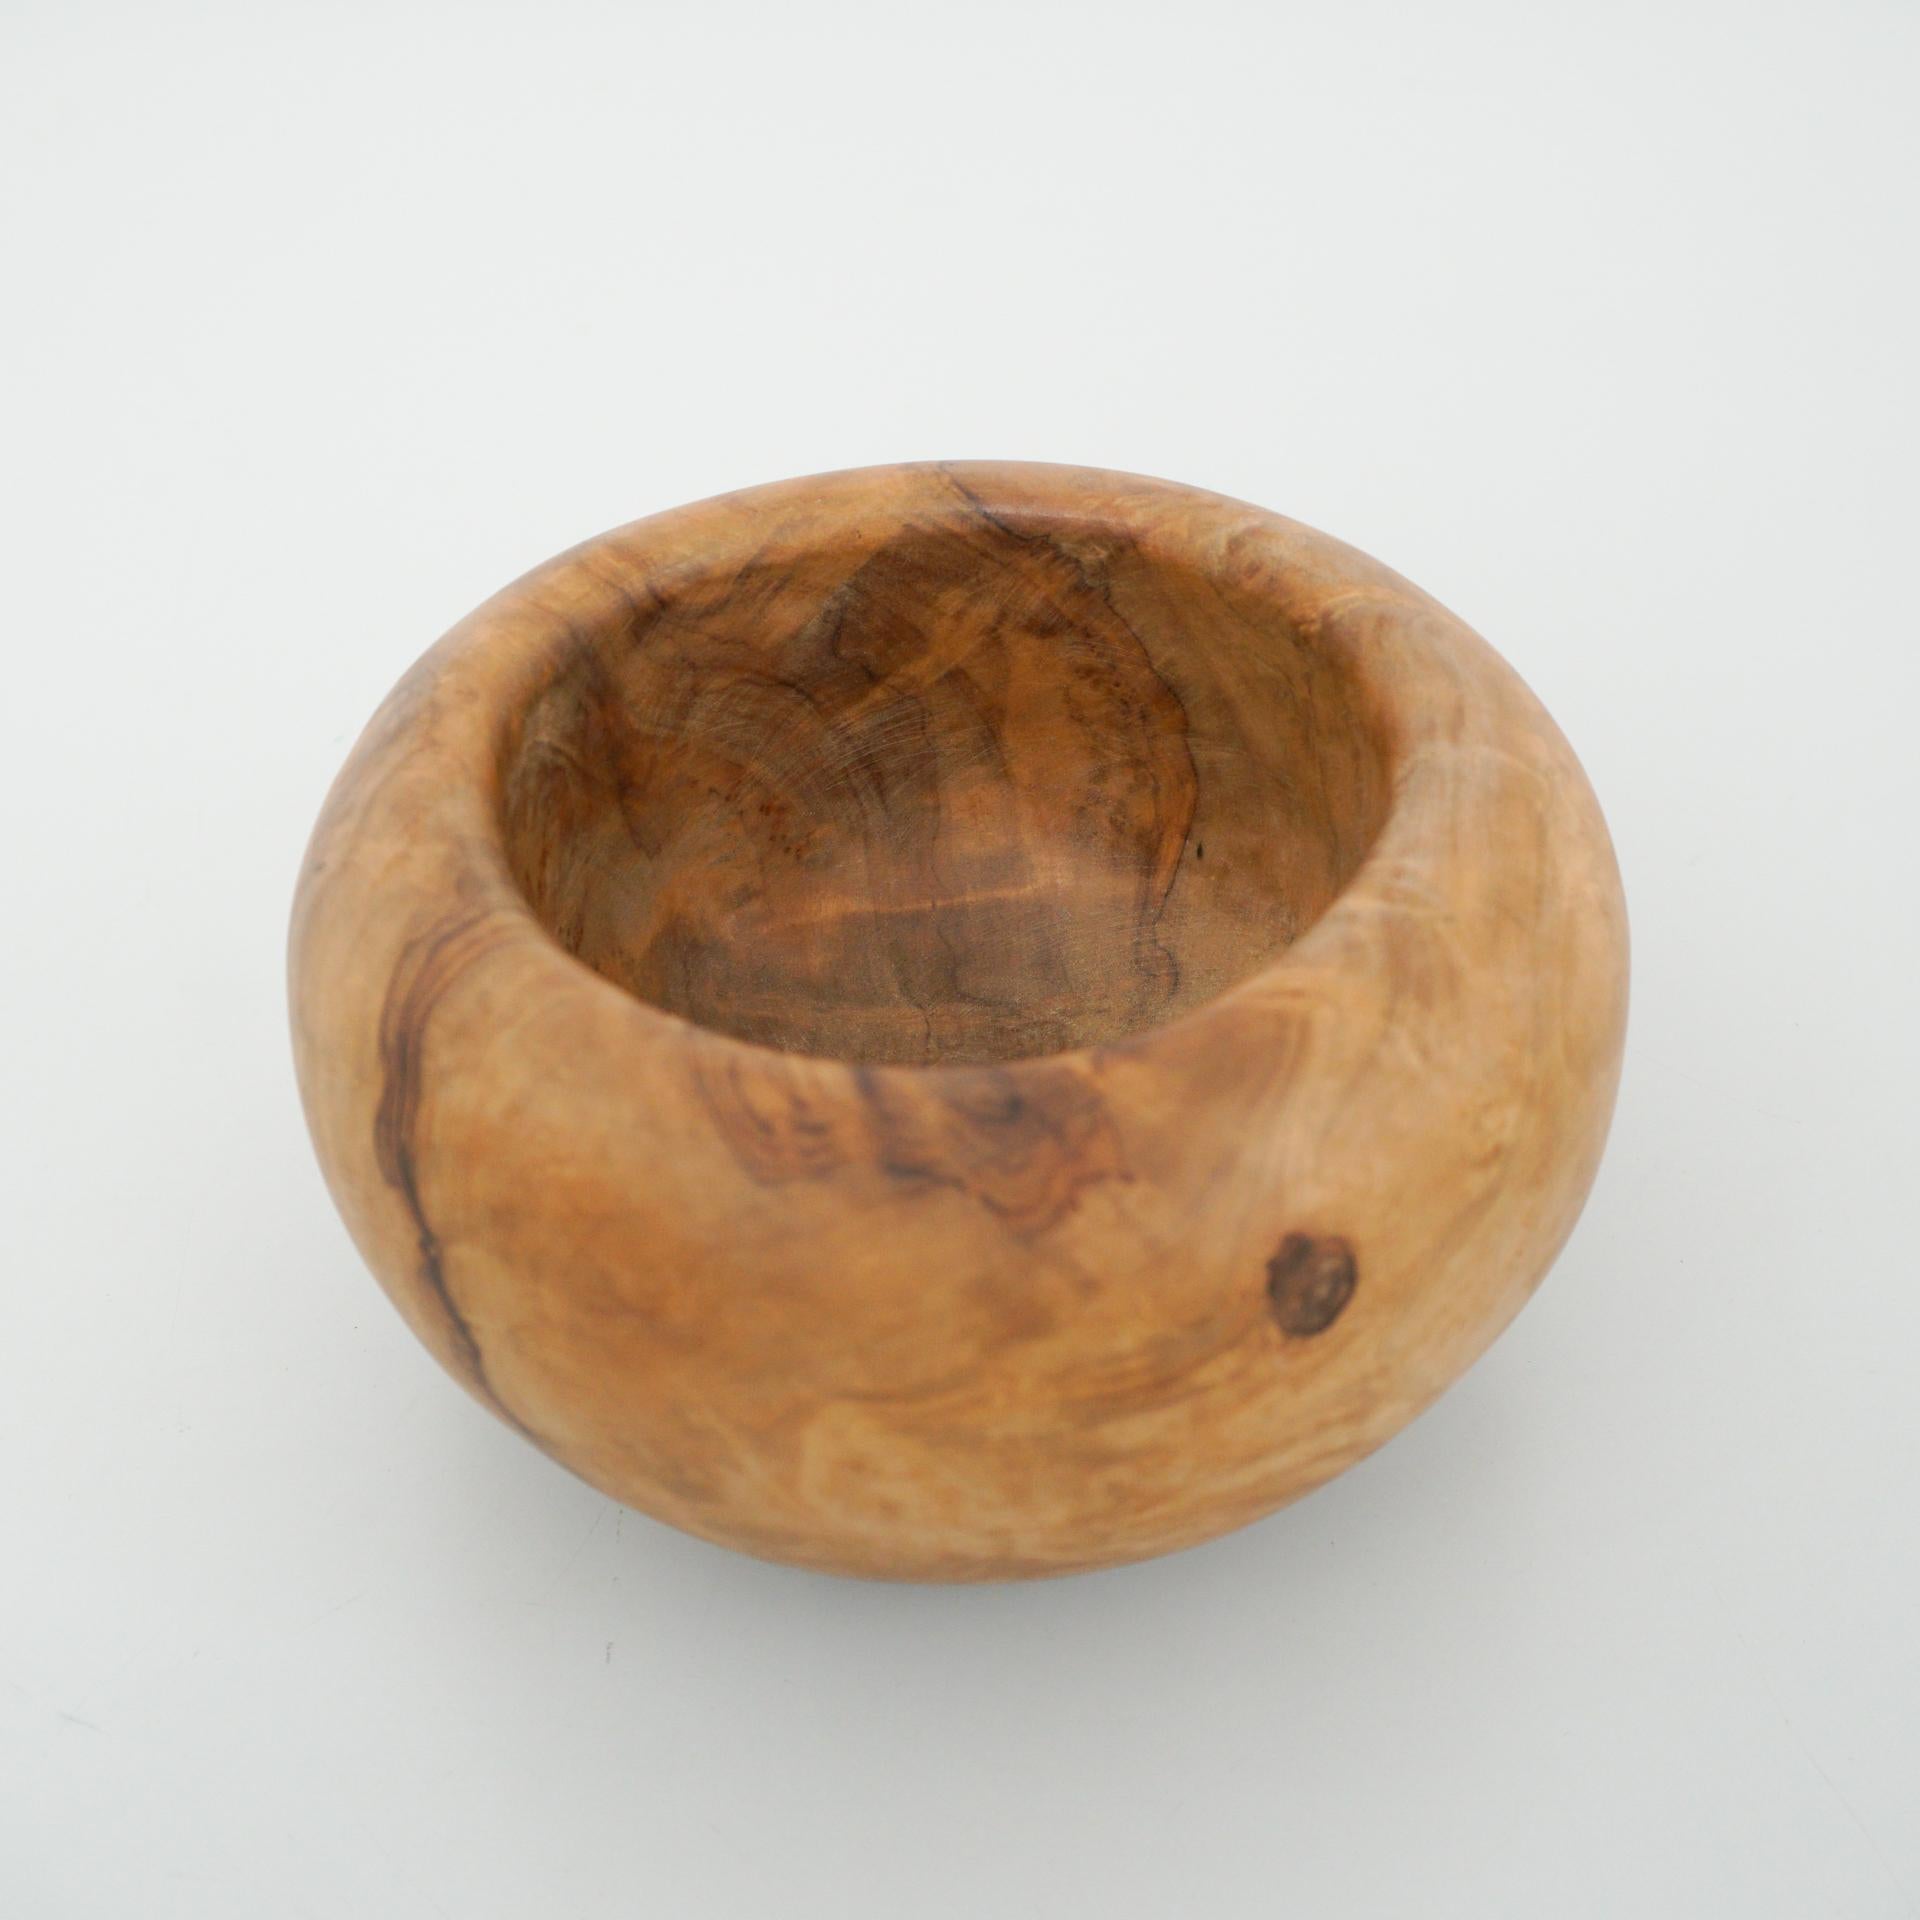 Embrace the charm and elegance of this authentic early 20th-century Spanish traditional olive wood bowl, meticulously crafted by an artisan. The natural beauty and character of the olive wood shine through in this piece, with a graceful patina that